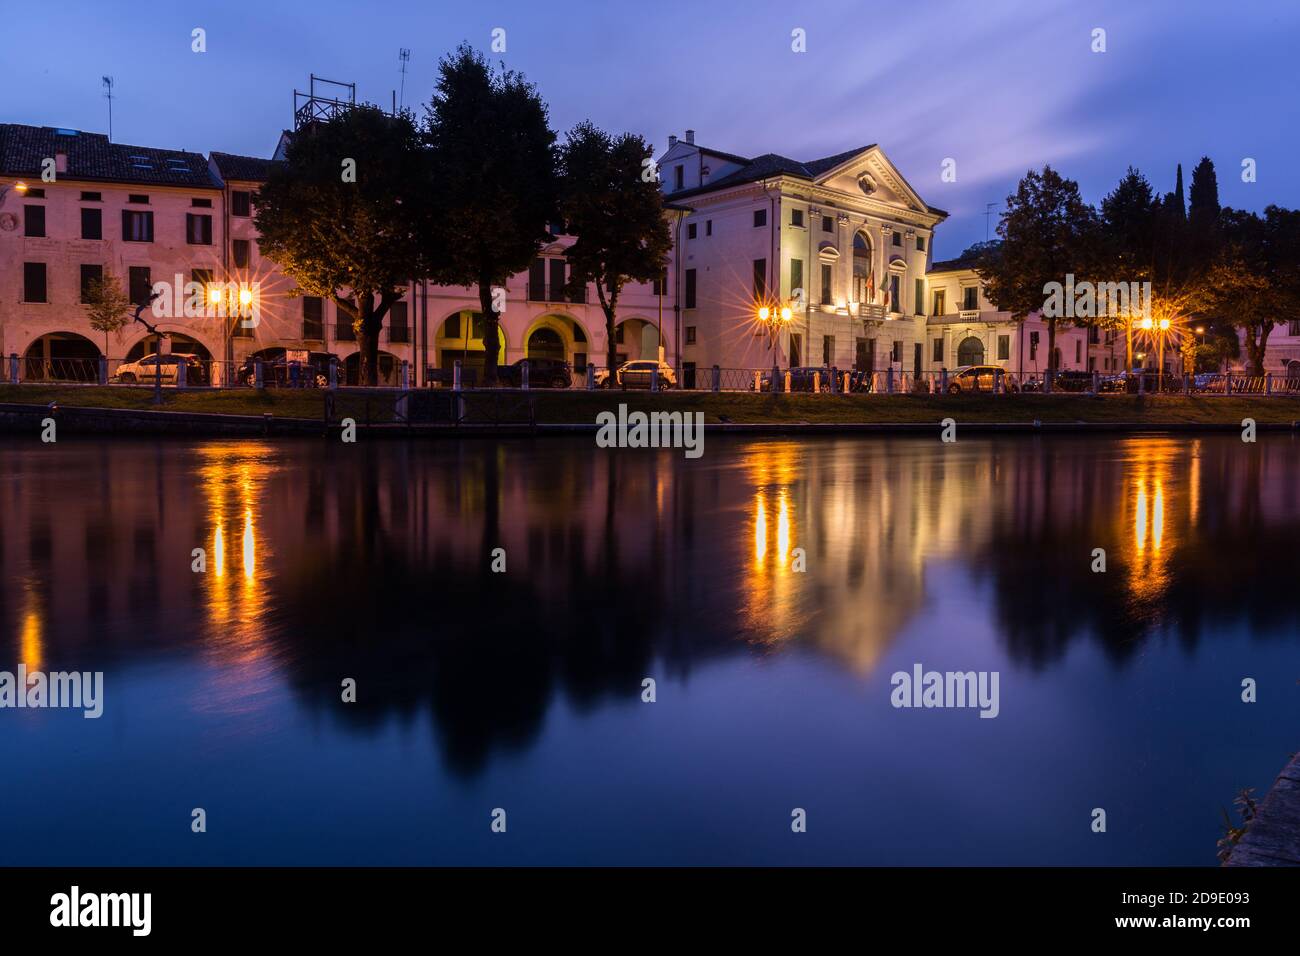 Picturesque view on the Sile river in the city center with lights reflections on the water at night Treviso Italy Stock Photo